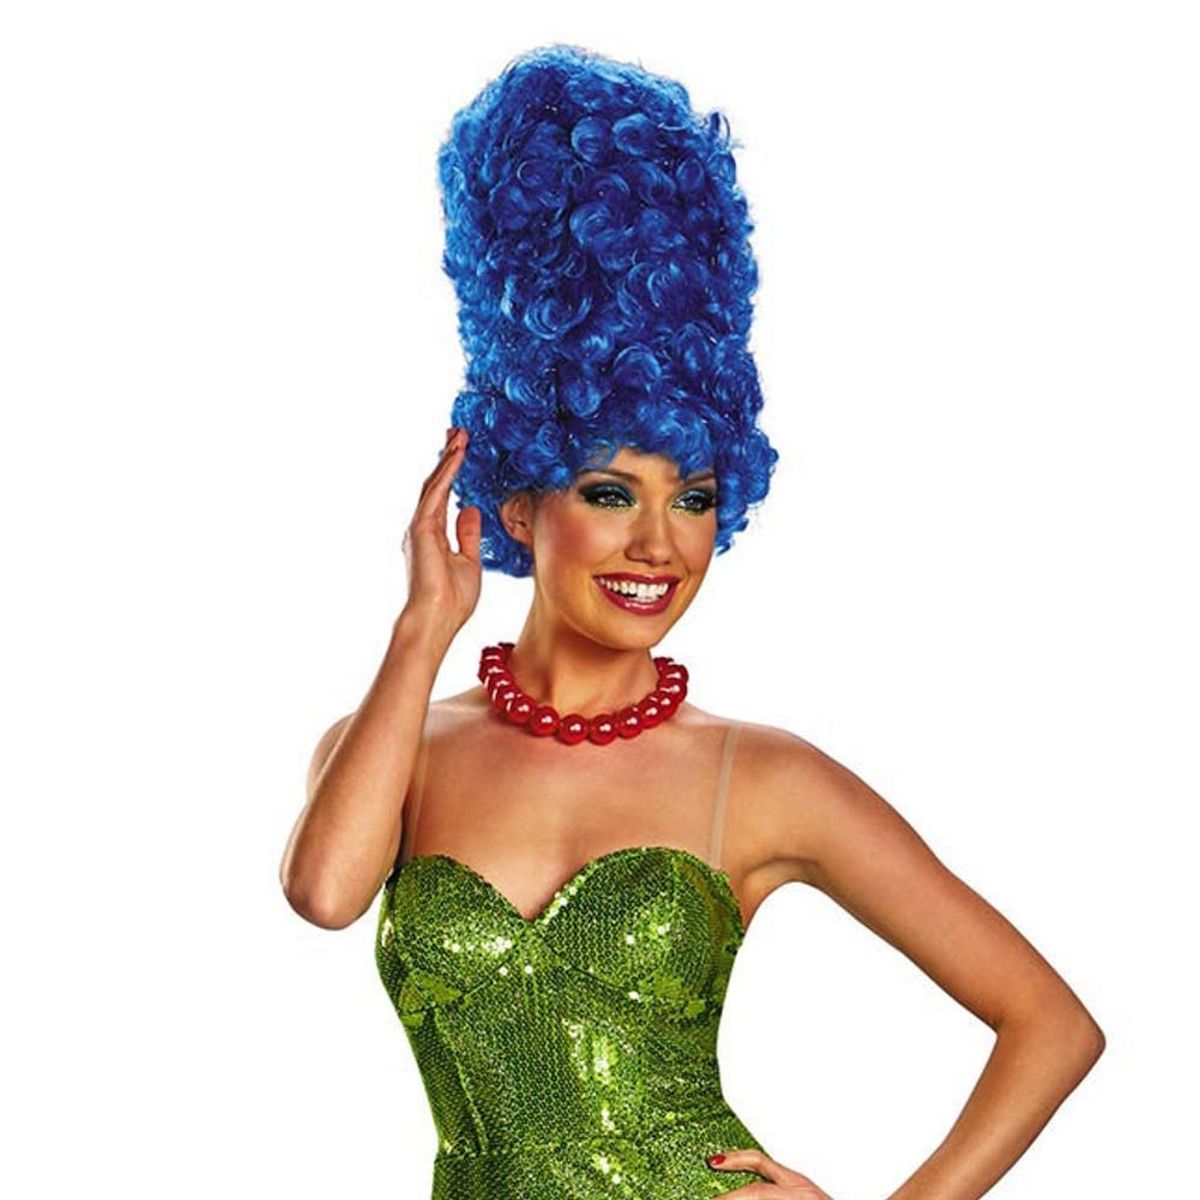 20 Wigs to Take Your Halloween Costume to the Next Level